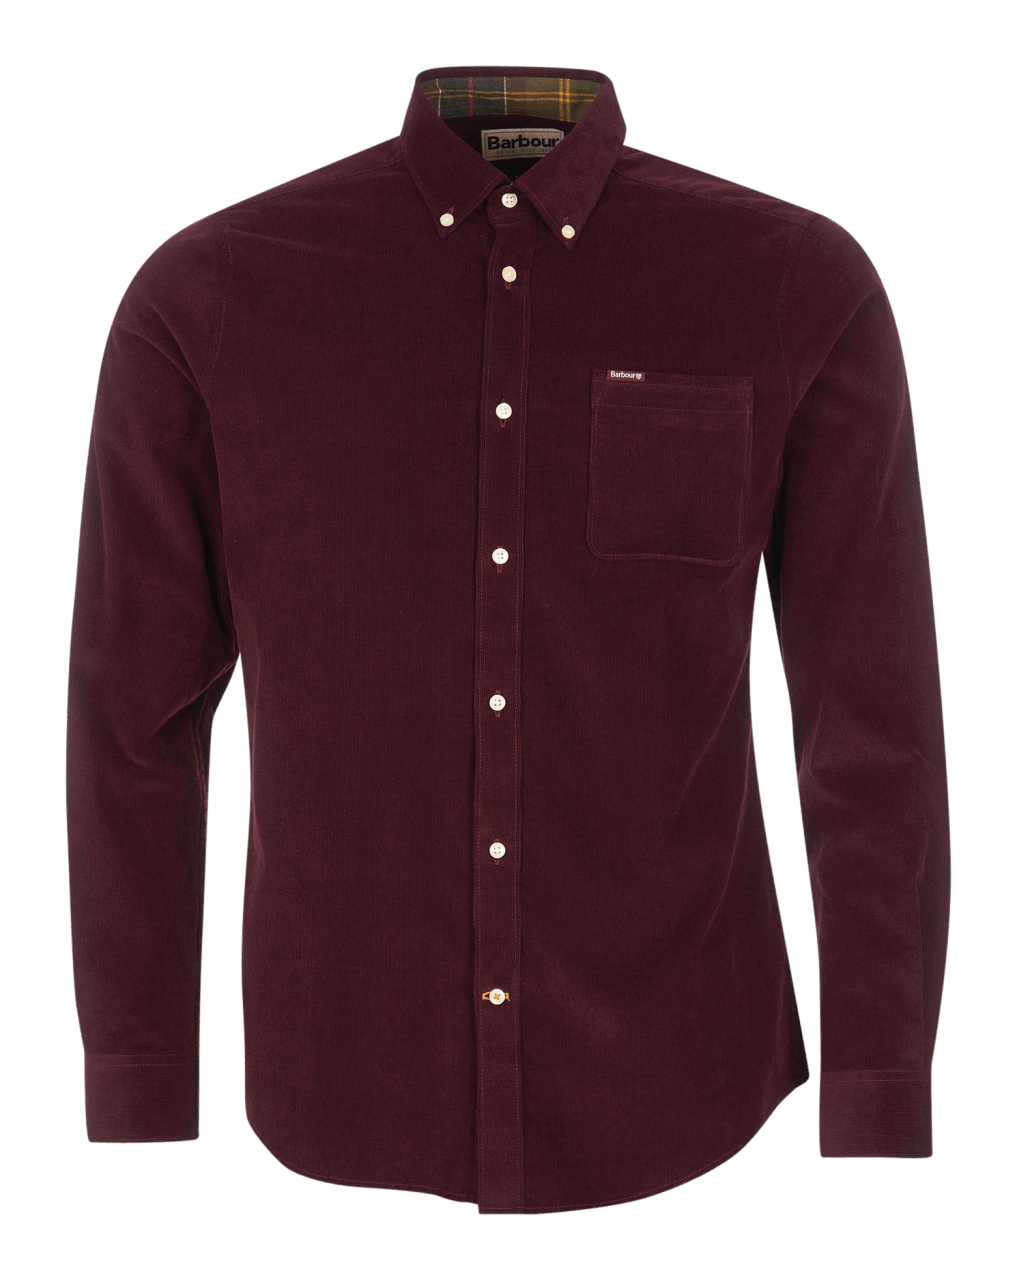 Barbour Ramsey Cord Shirt - winter red